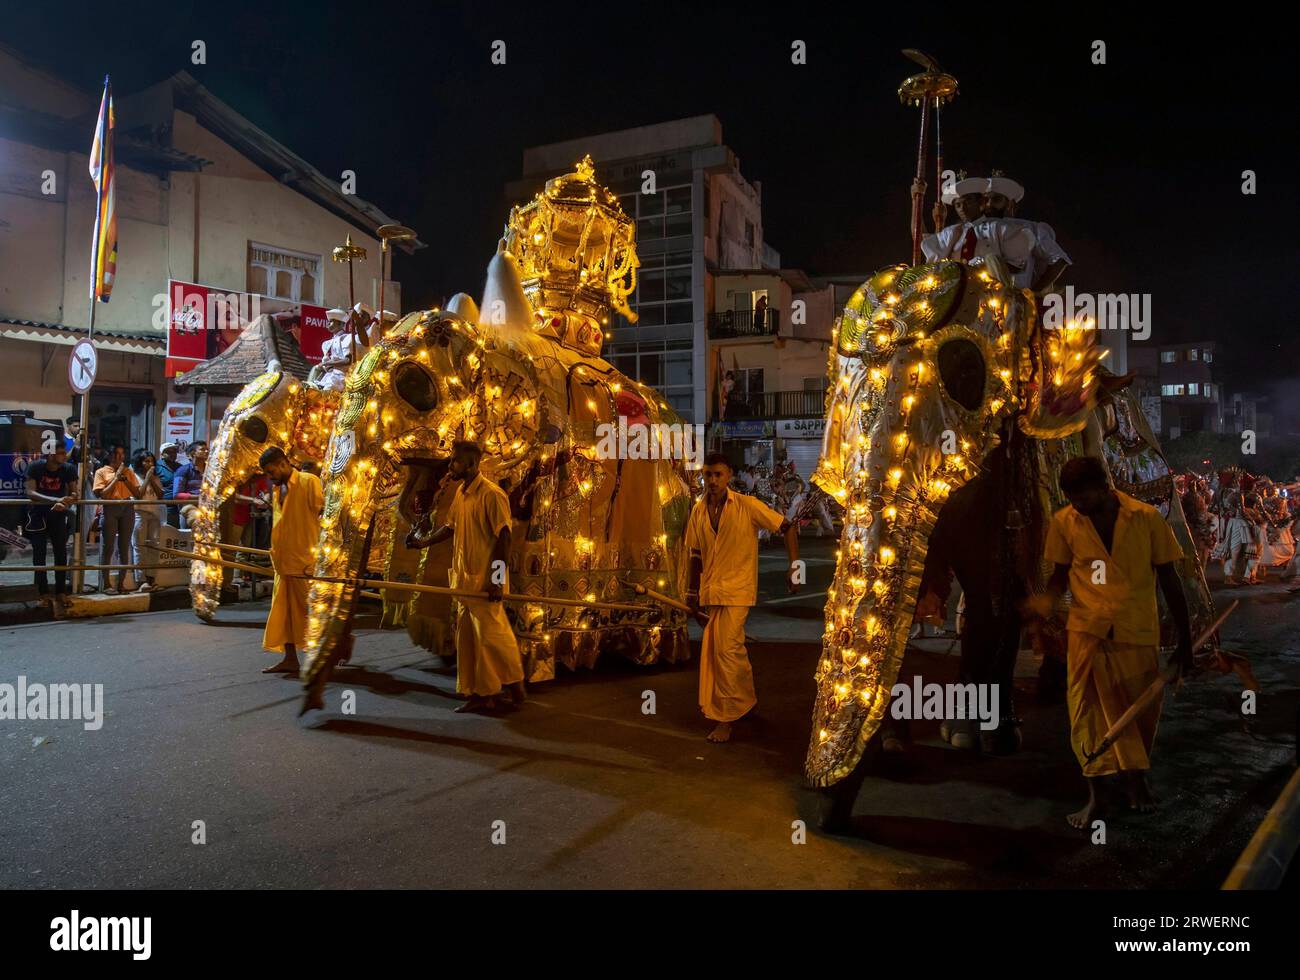 A group of ceremonial elephants parade along a street.at Kandy in Sri Lanka during the Esala Perahera (great procession). Stock Photo